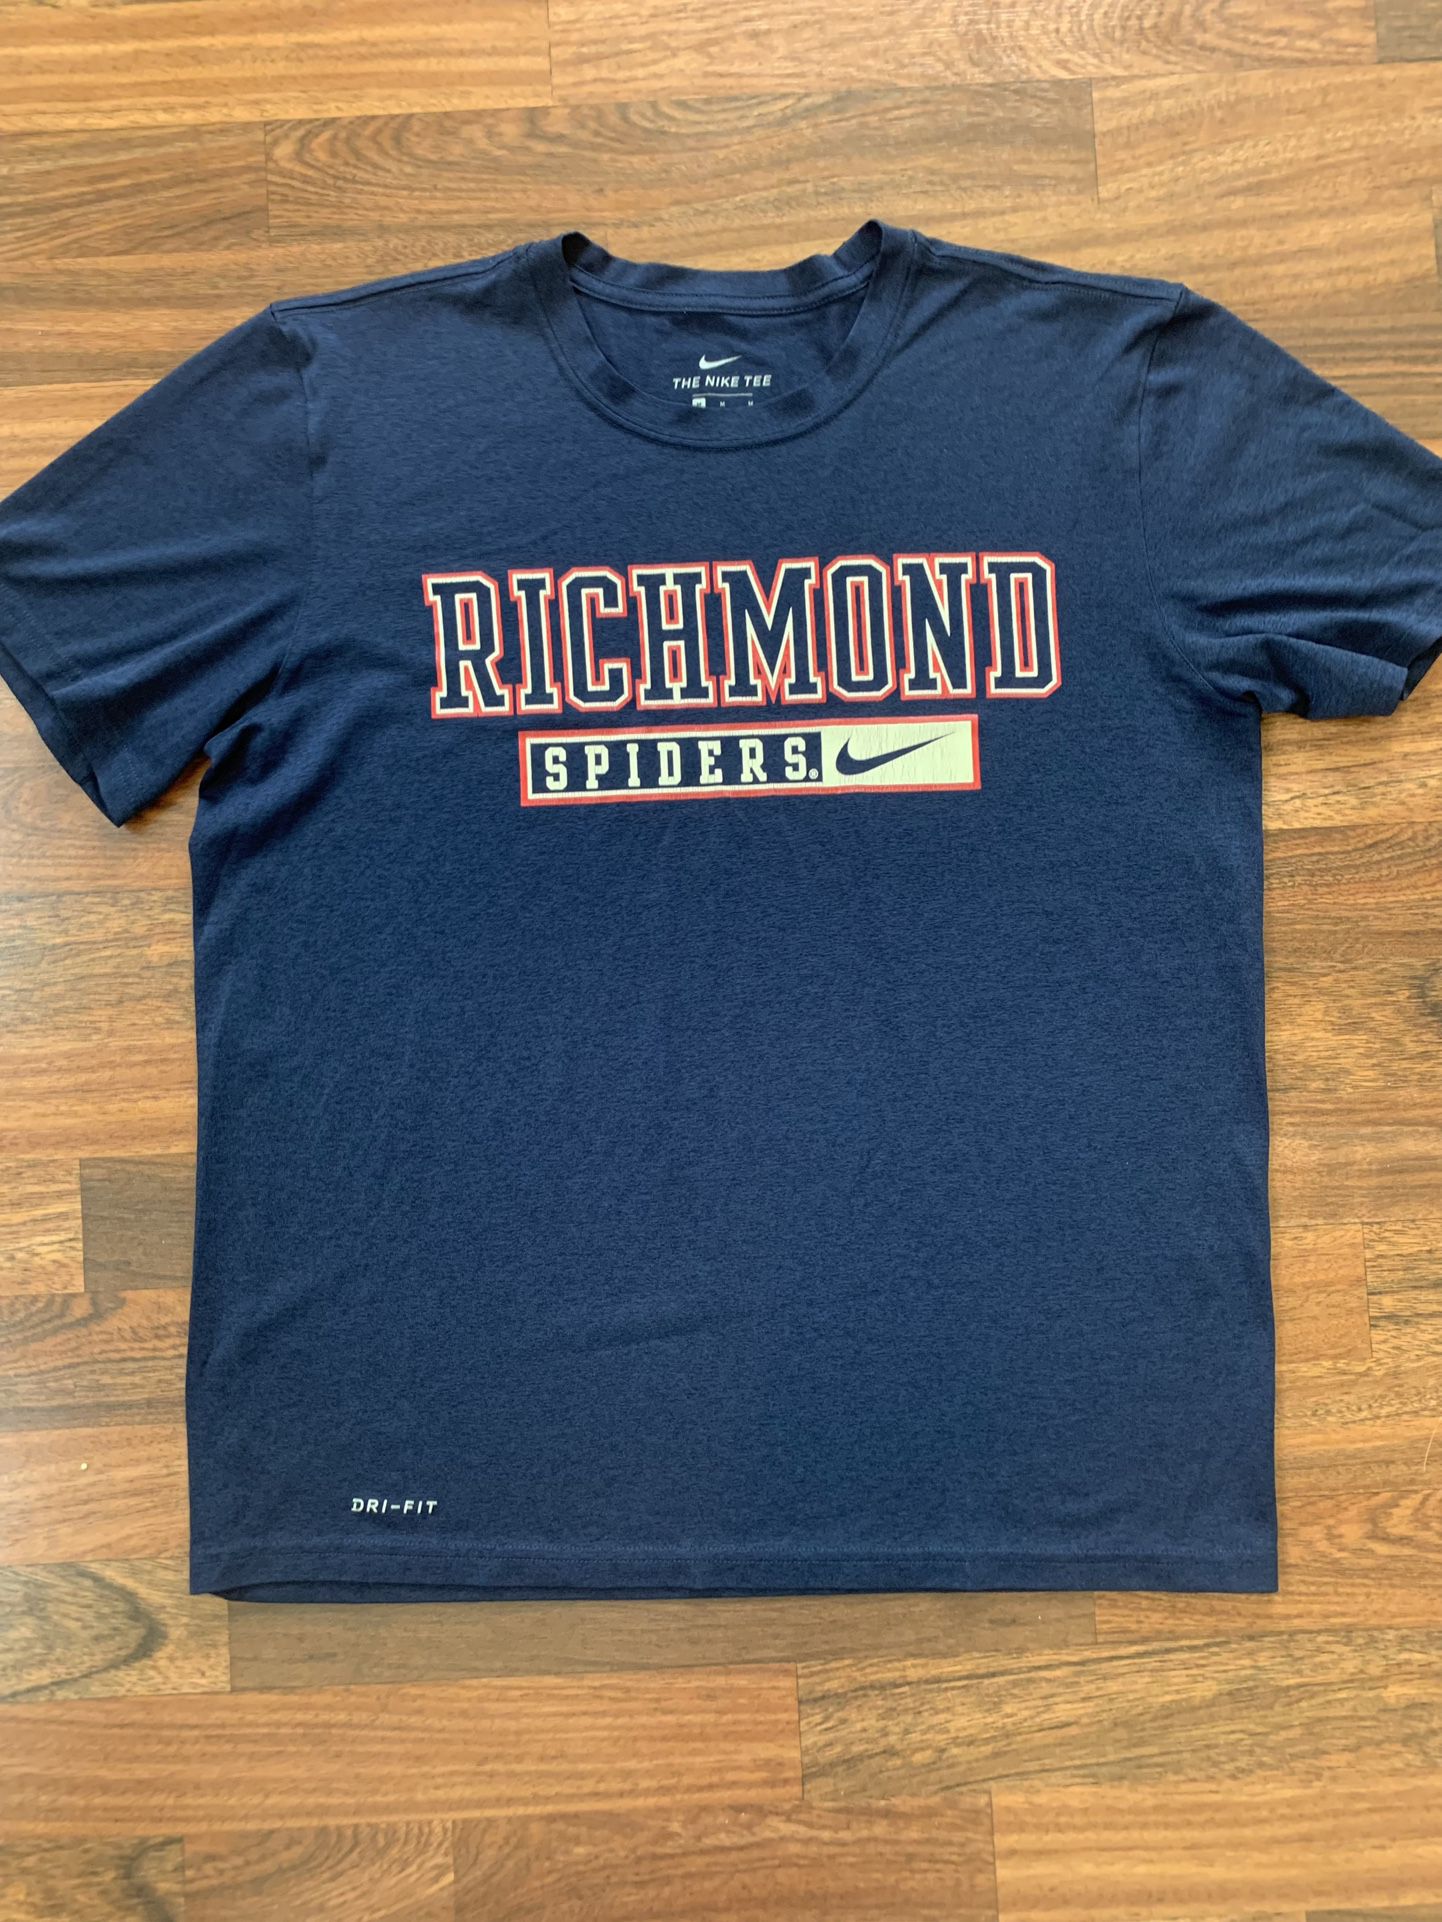 The Nike Tee Dri-Fit Men’s Size M Richmond Spiders Athletic Cut Navy Blue